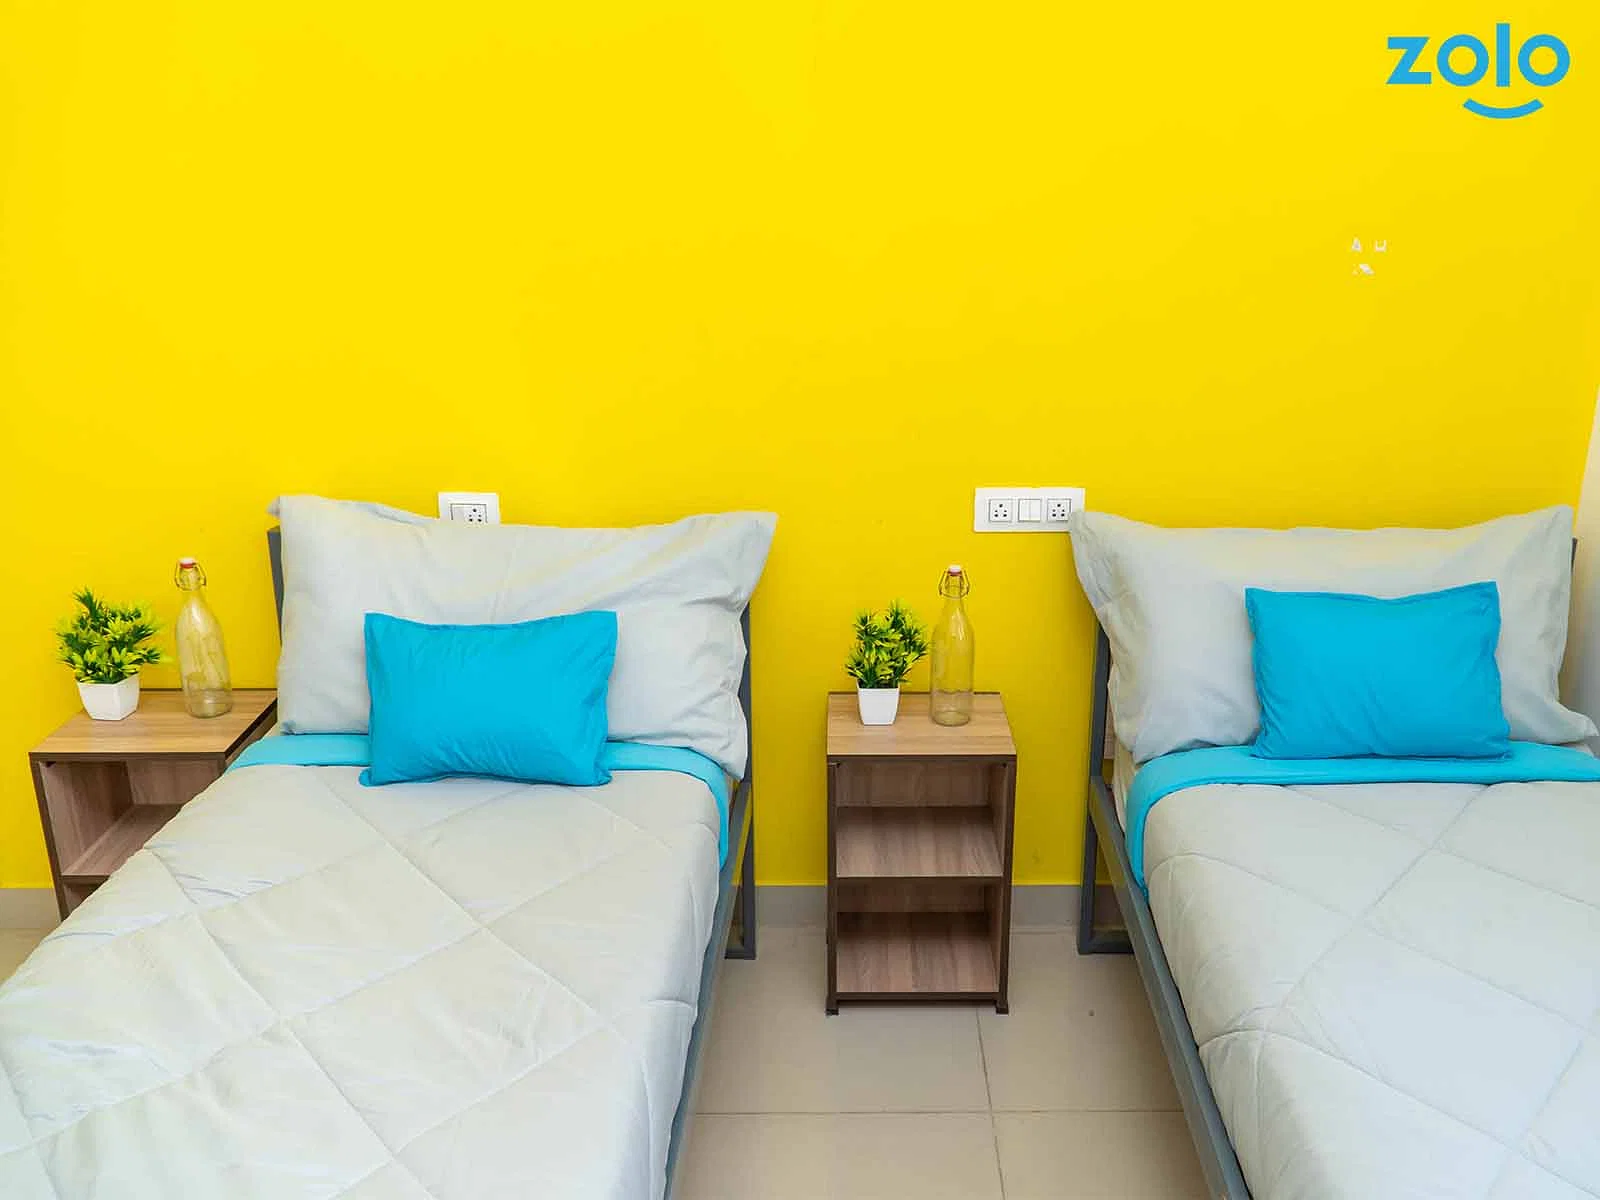 Affordable single rooms for students and working professionals in Sarjapura-Bangalore-Zolo Estonia A